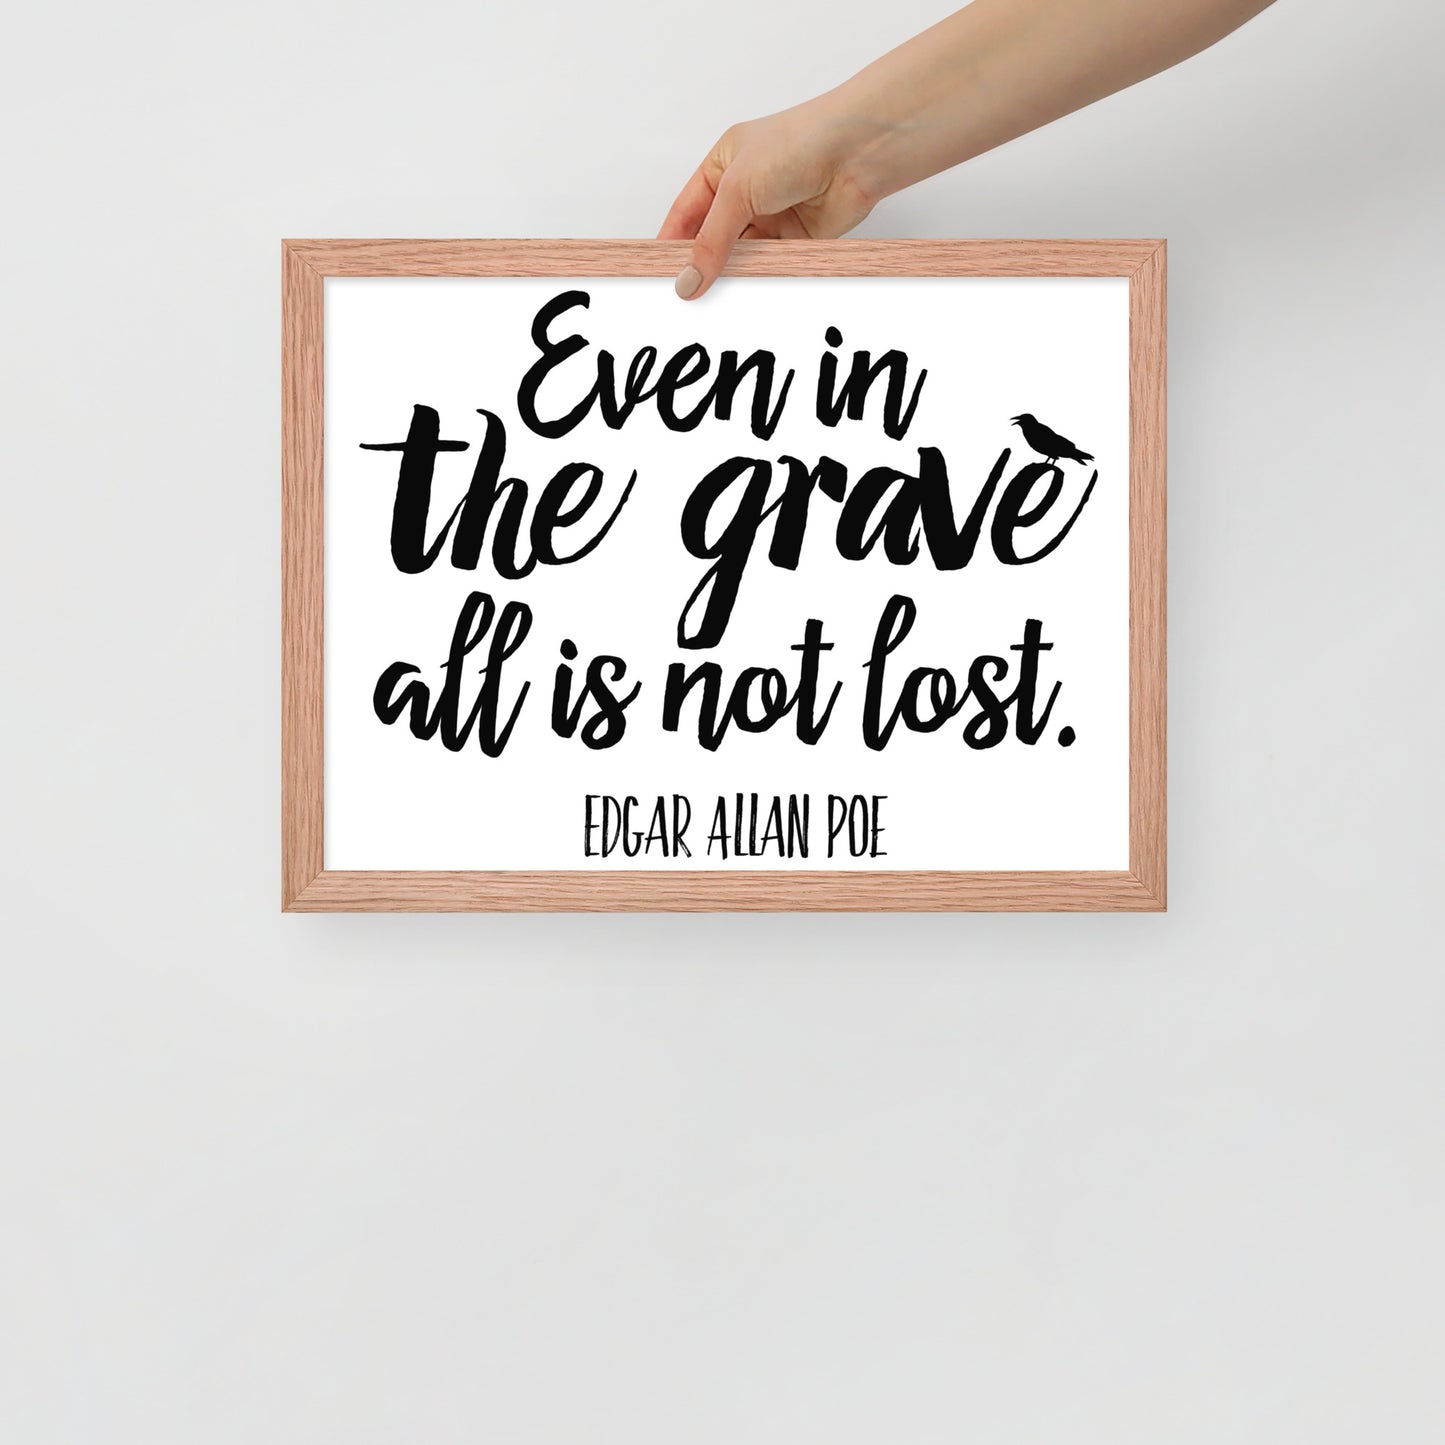 Even in the Grave - Edgar Allan Poe Quote Framed Poster - 12 x 16 Red Oak Frame